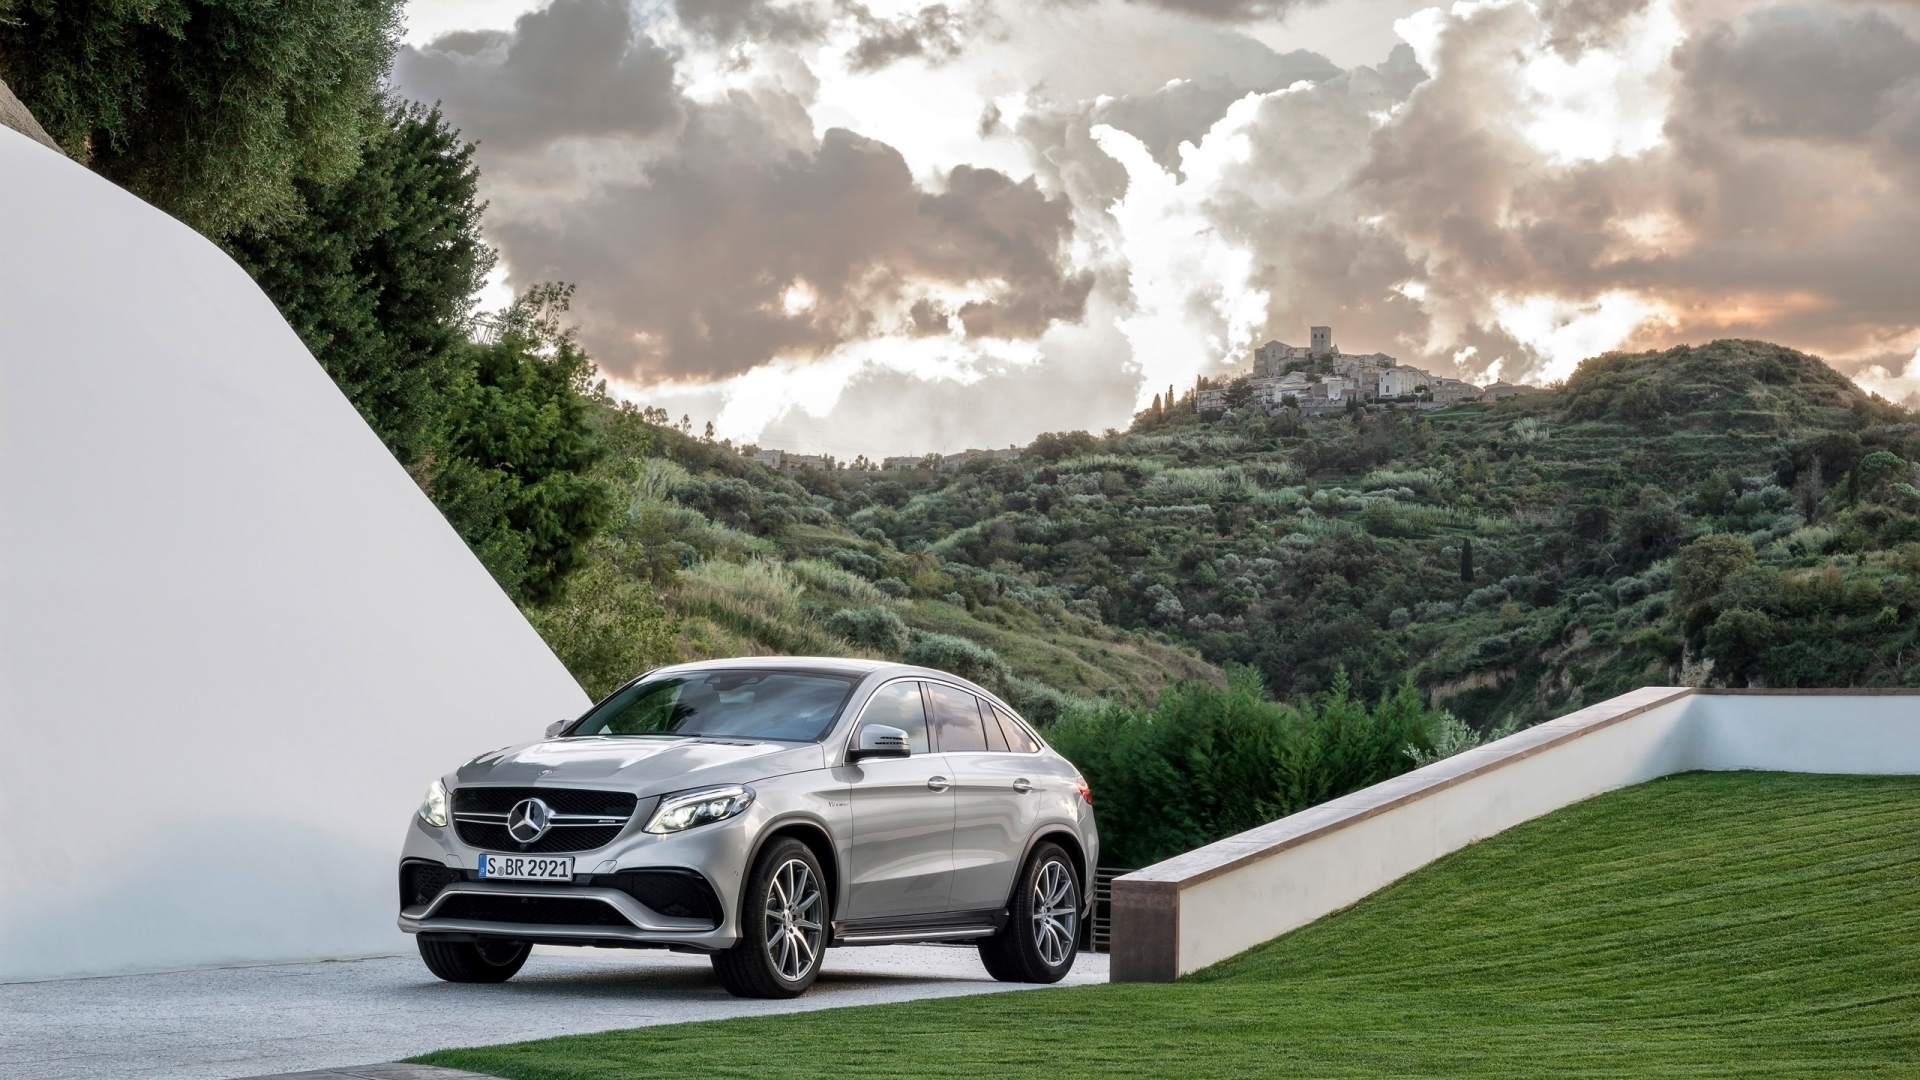 2015 Mercedes-AMG GLE 63 Coupe for 1920 x 1080 HDTV 1080p resolution